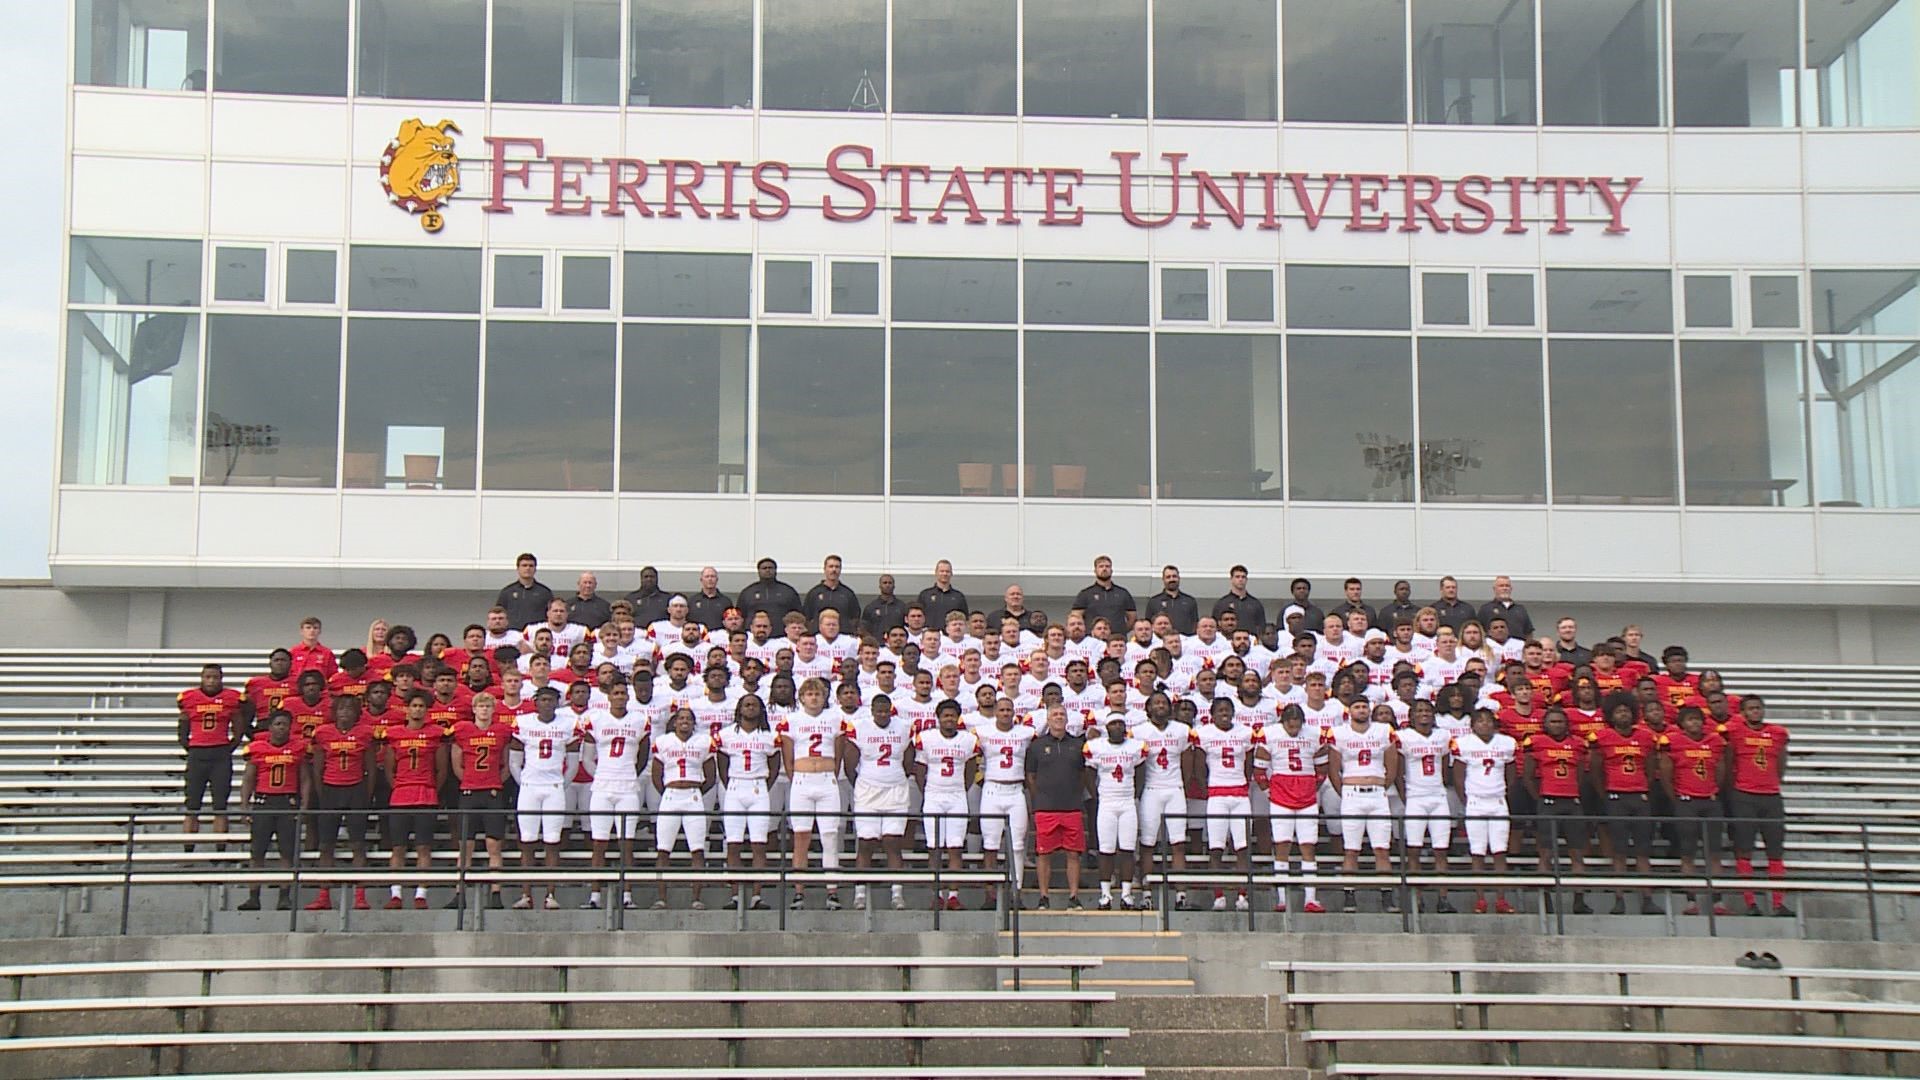 The Ferris State Bulldogs are ready for the 2022 season to begin as the team gathered at Top Taggart Field on Saturday morning for team pictures and a scrimmage.